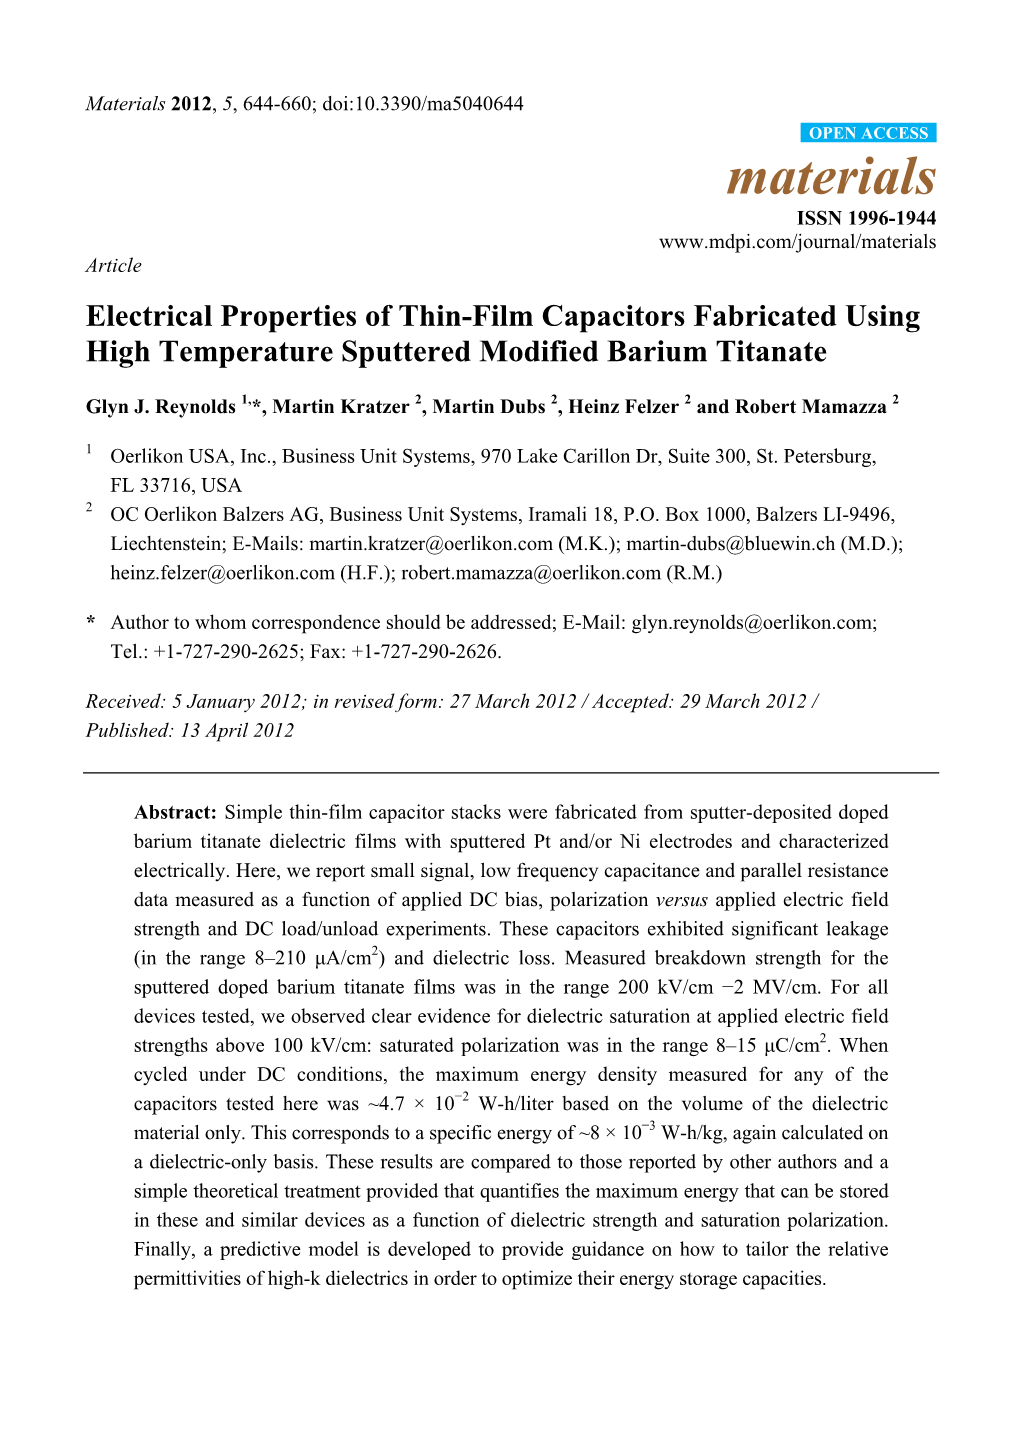 Electrical Properties of Thin-Film Capacitors Fabricated Using High Temperature Sputtered Modified Barium Titanate